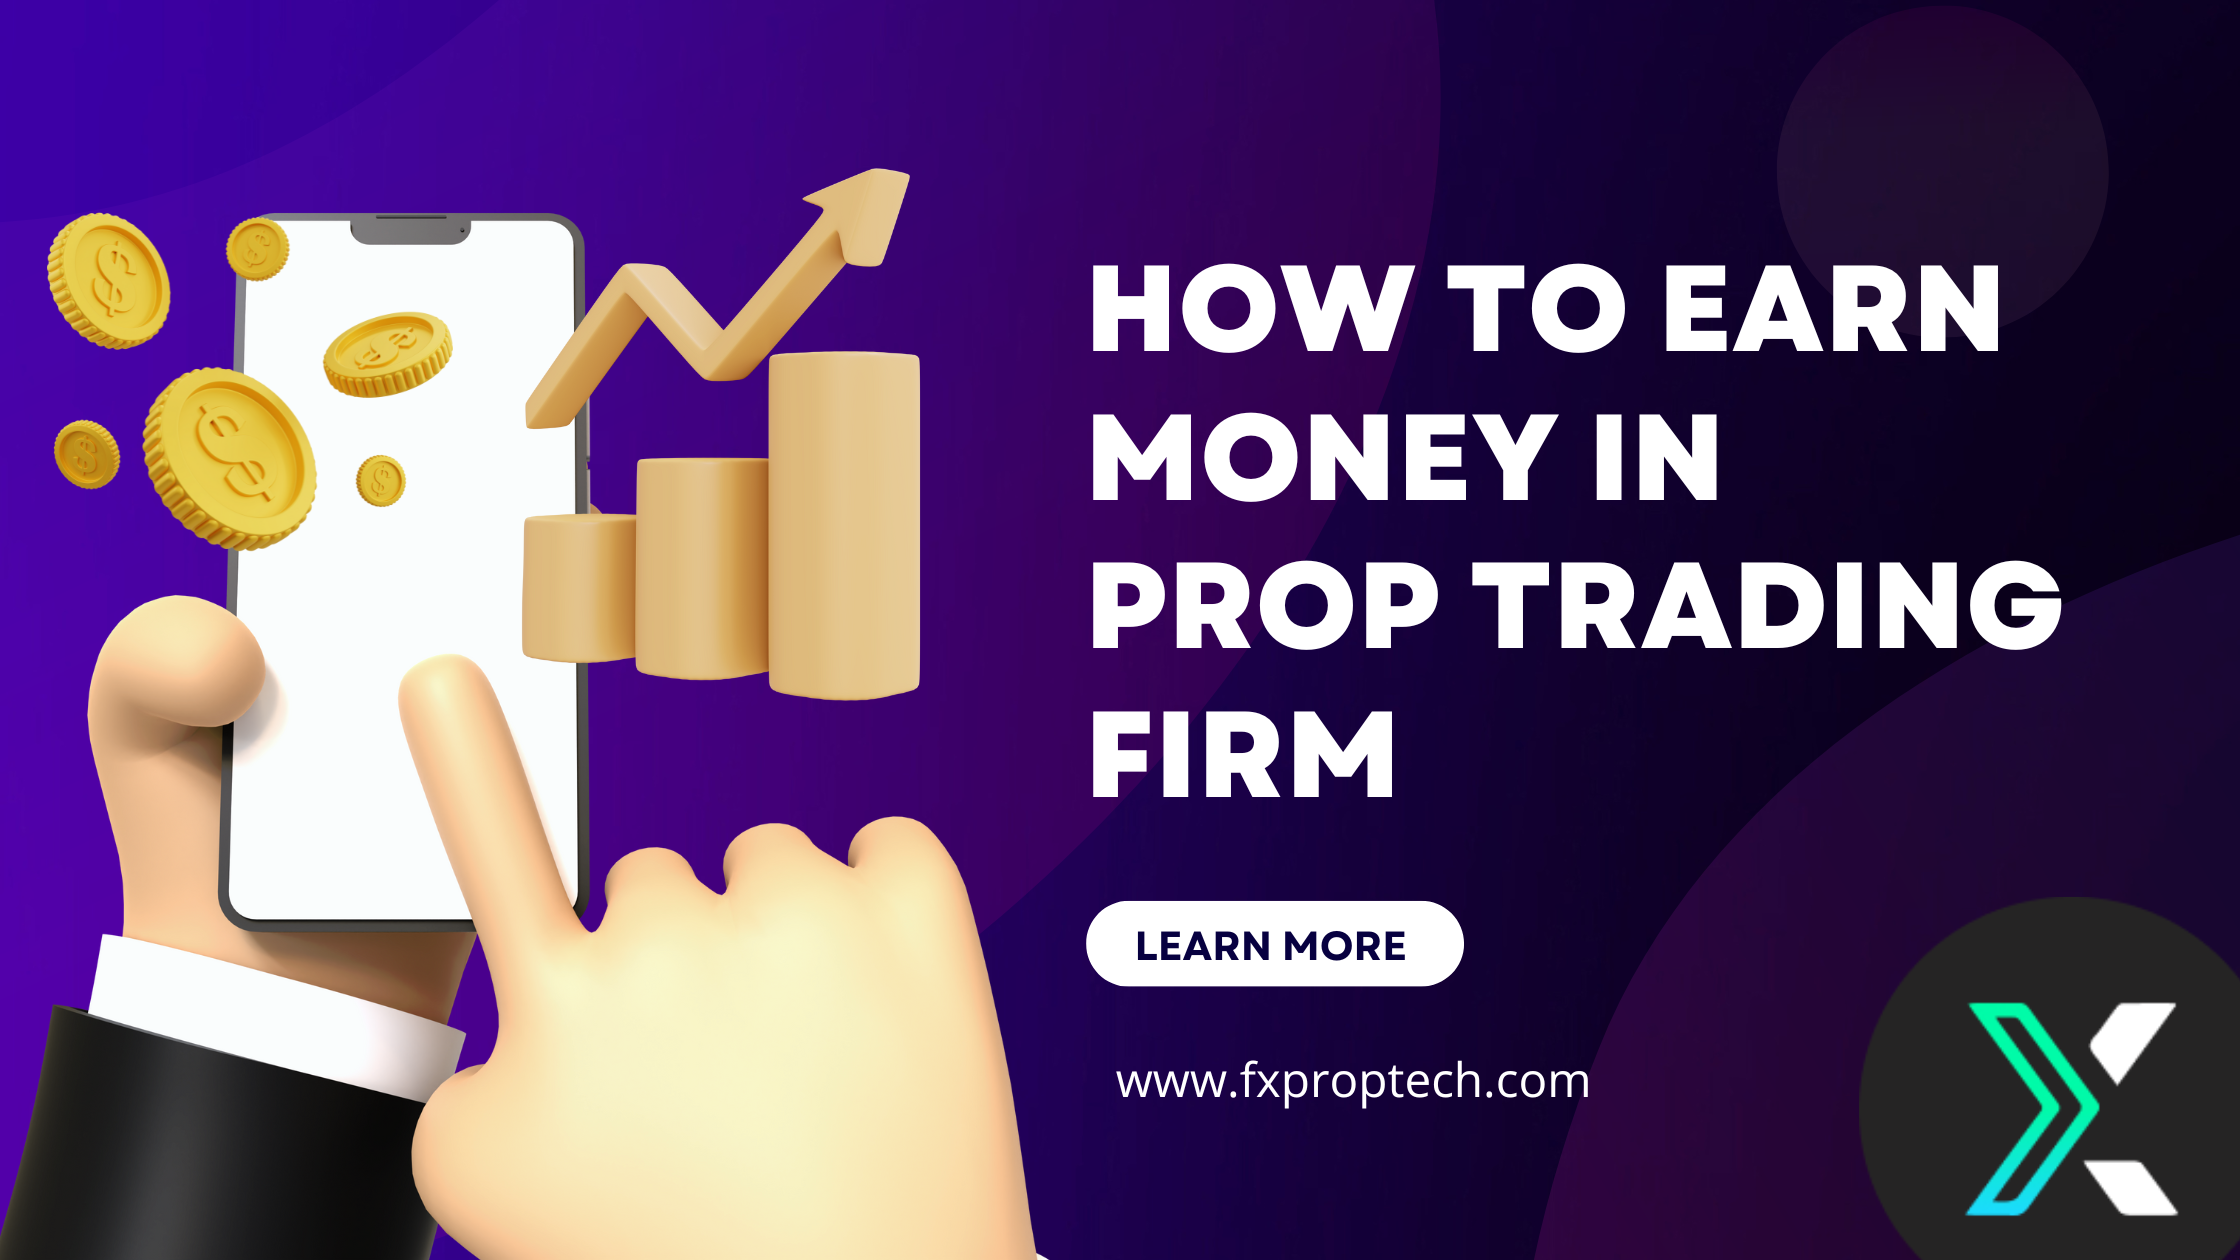 How to earn money in proprietary trading firm